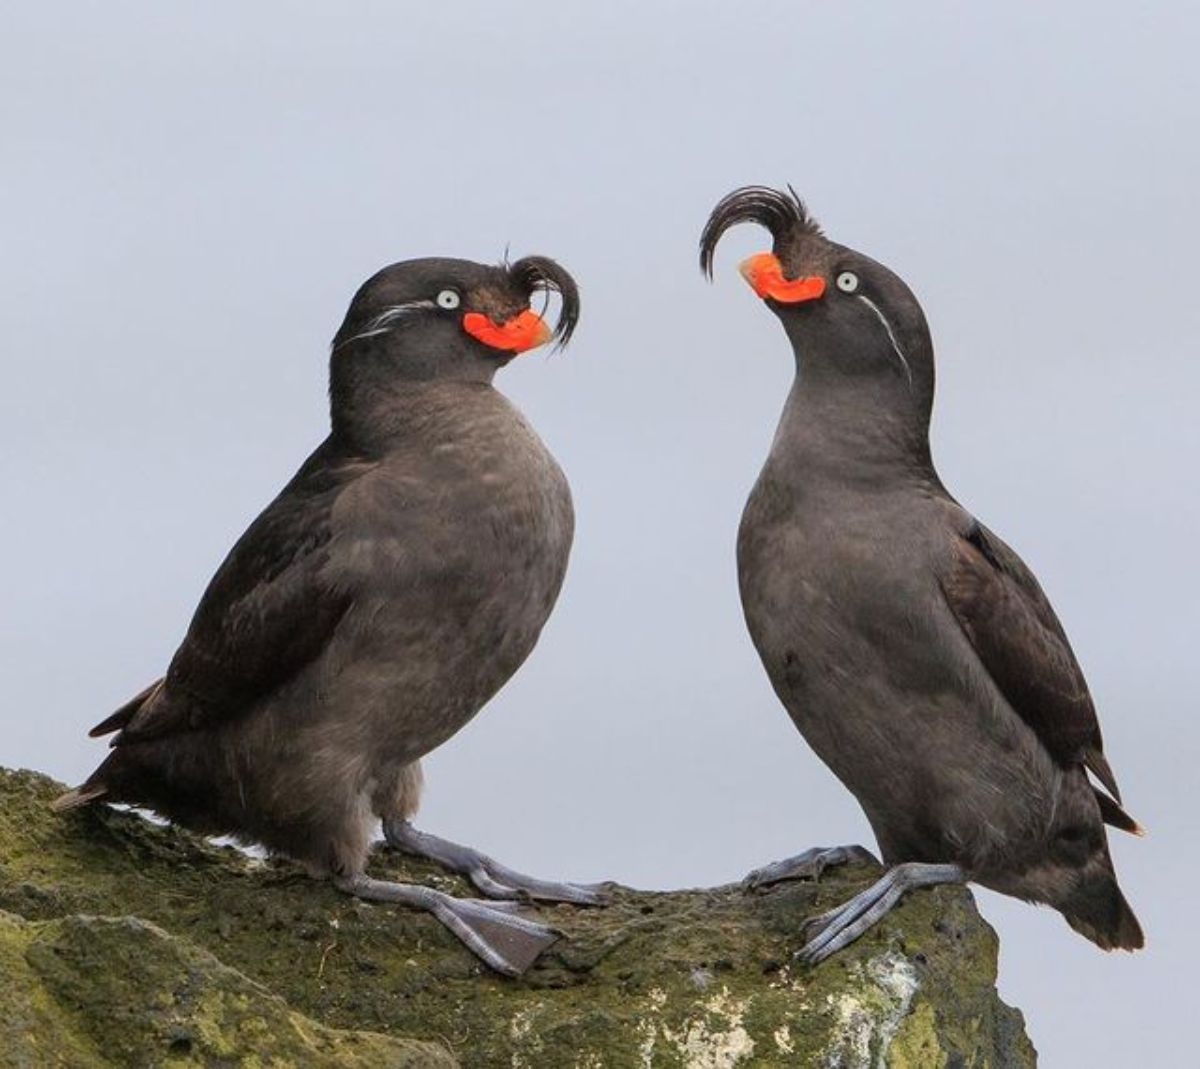 Two adorable Crested Auklets perched on a rock.